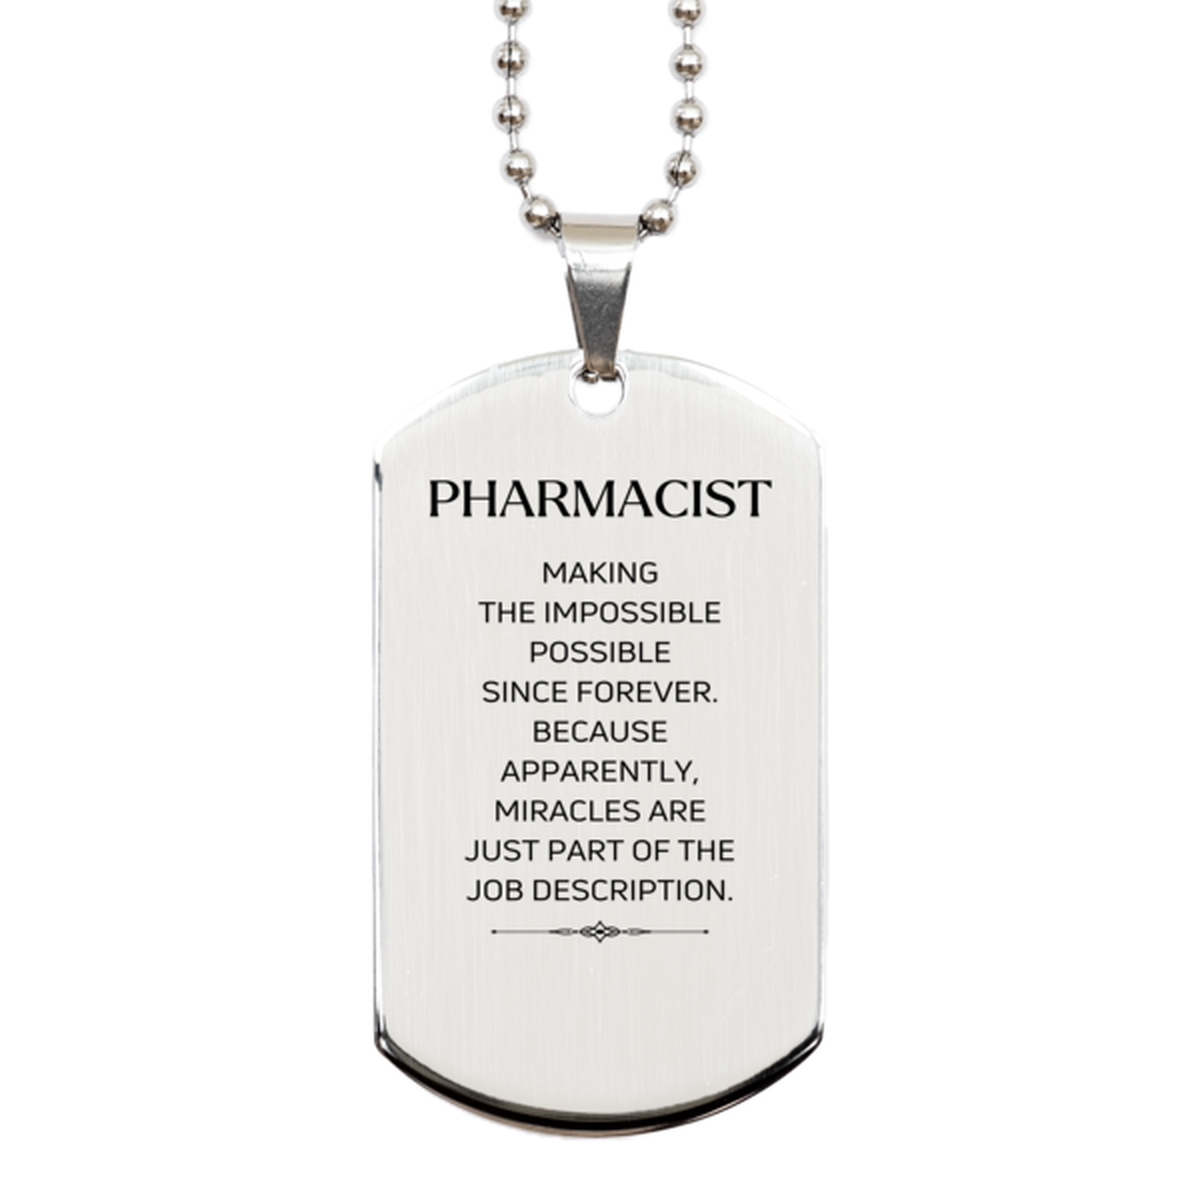 Funny Pharmacist Gifts, Miracles are just part of the job description, Inspirational Birthday Silver Dog Tag For Pharmacist, Men, Women, Coworkers, Friends, Boss